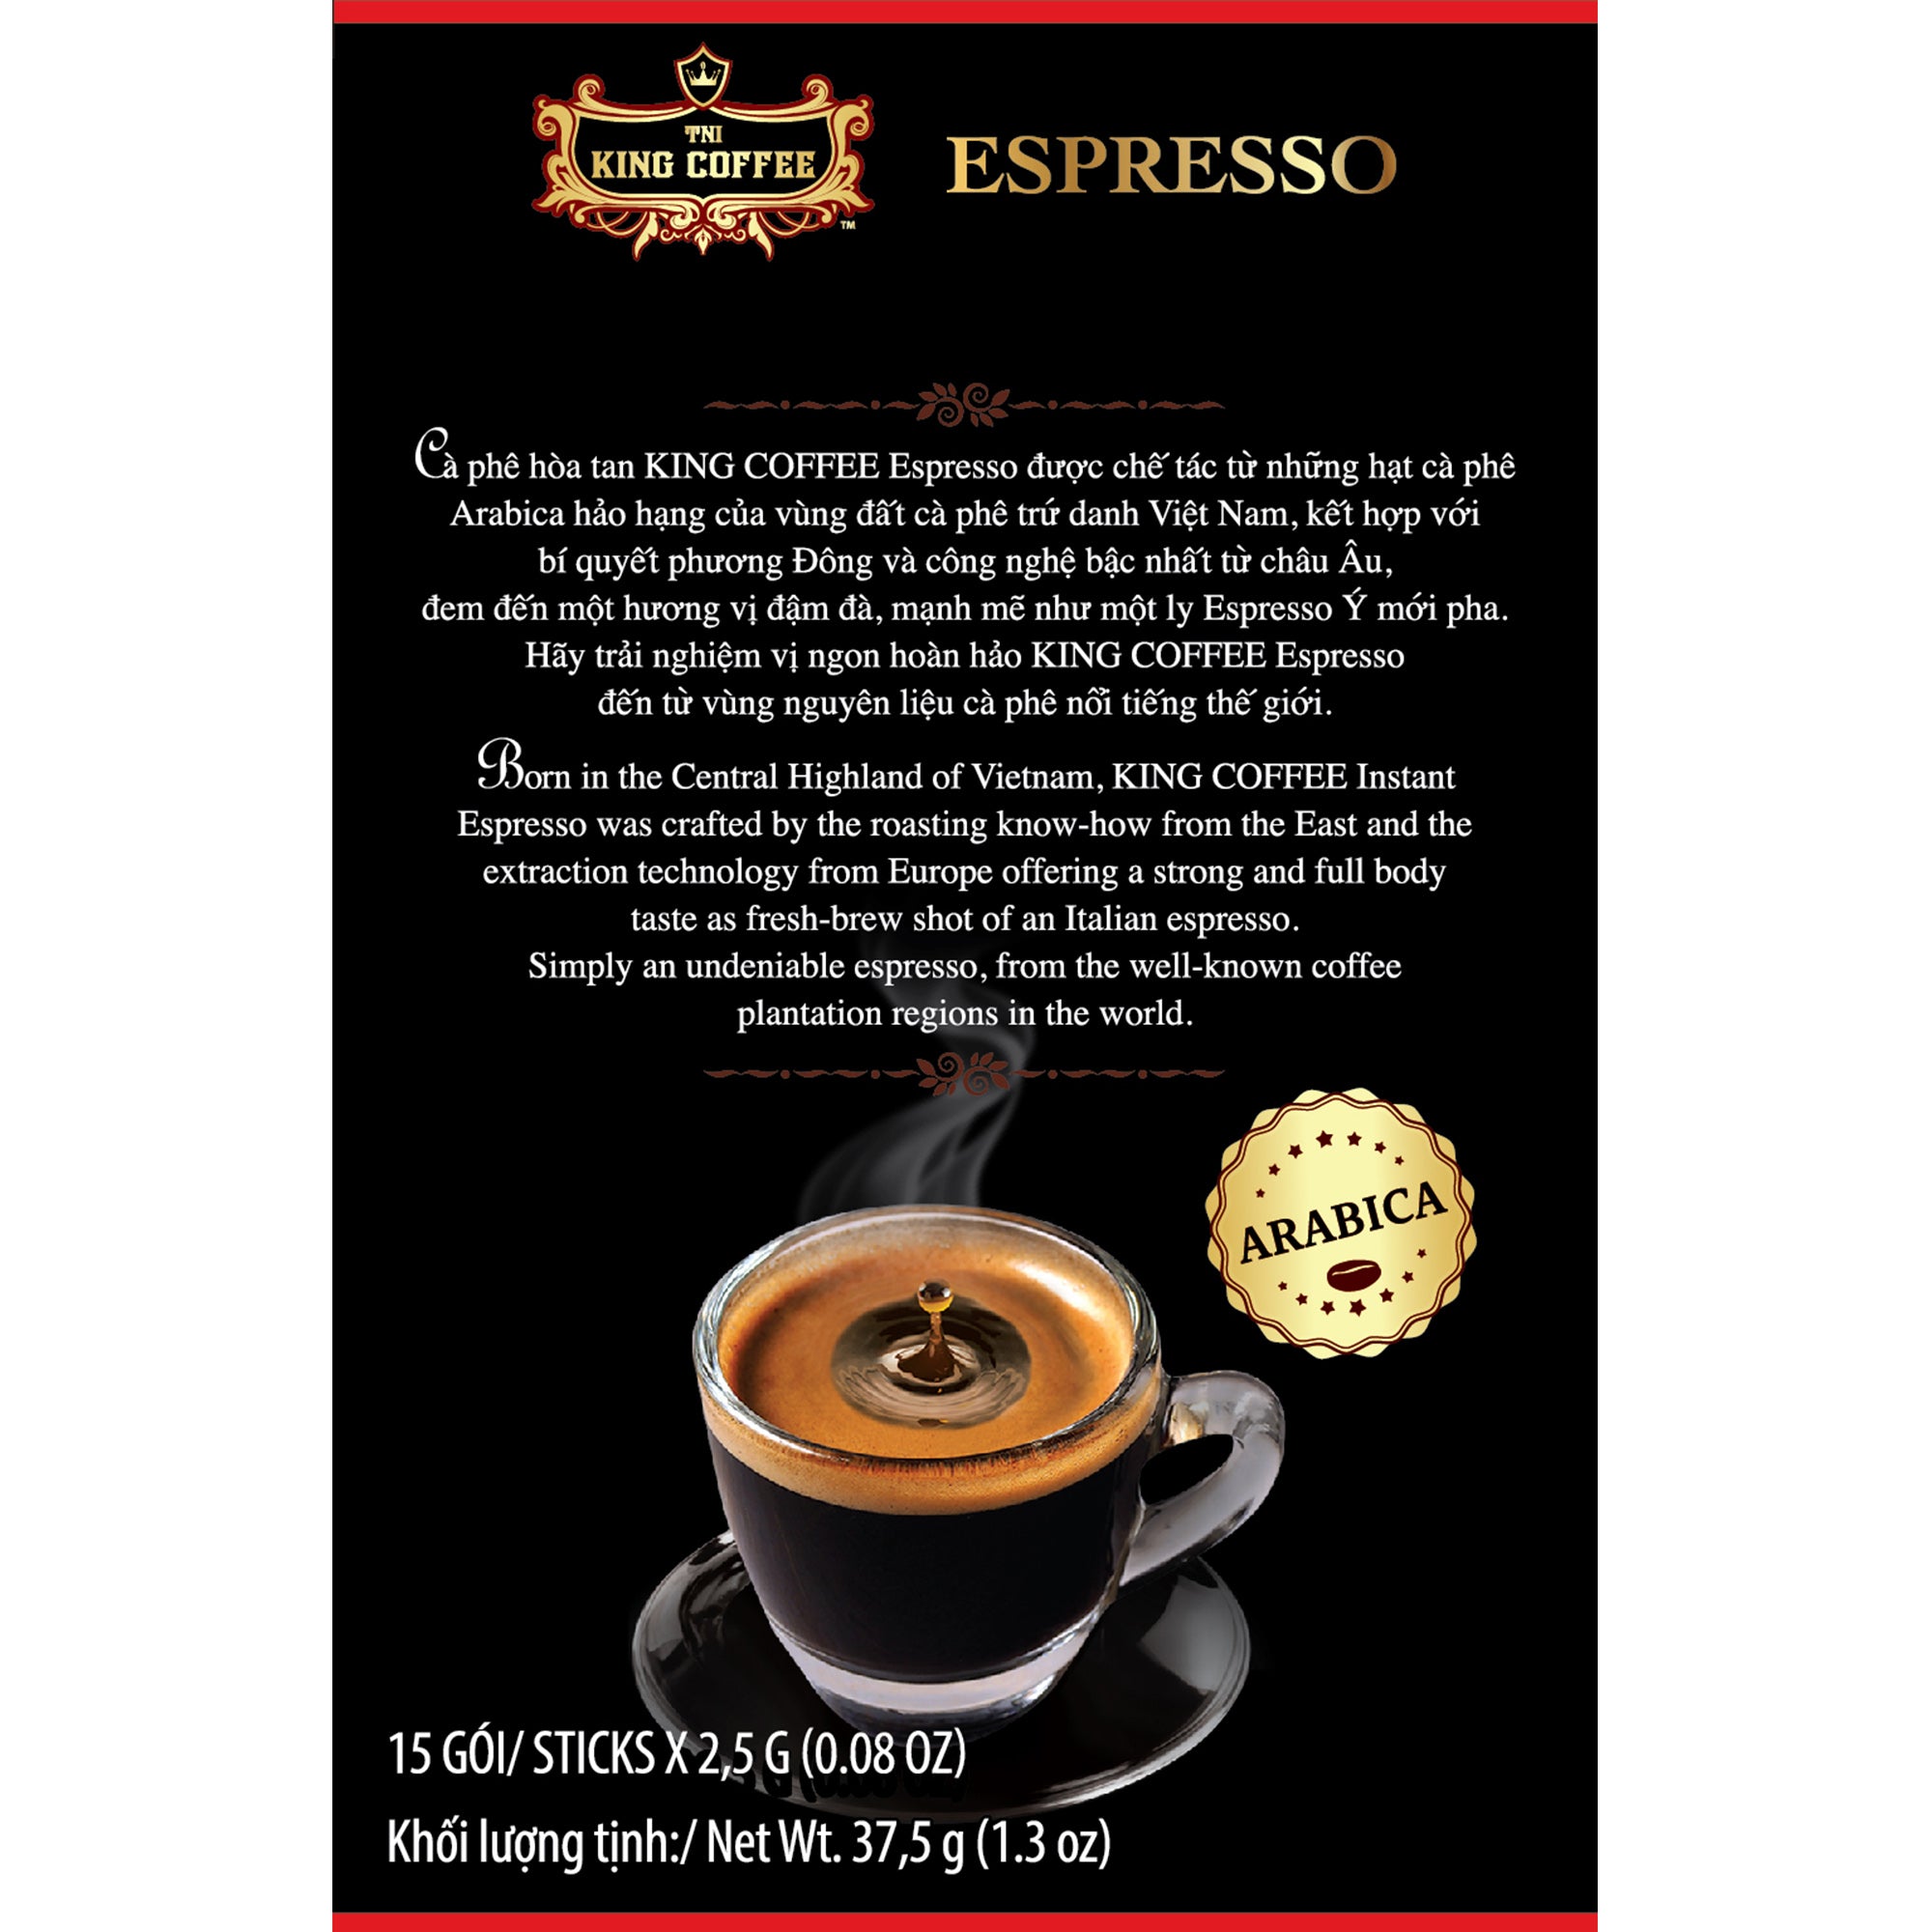 King Coffee on X: Espresso KING COFFEE - Express yourself 😎 The premium  Instant Espresso to rock your day at home, office or traveling. Just only  faster and easier! #TNI #KINGCOFFEE #GLOBALEXPERIENCE